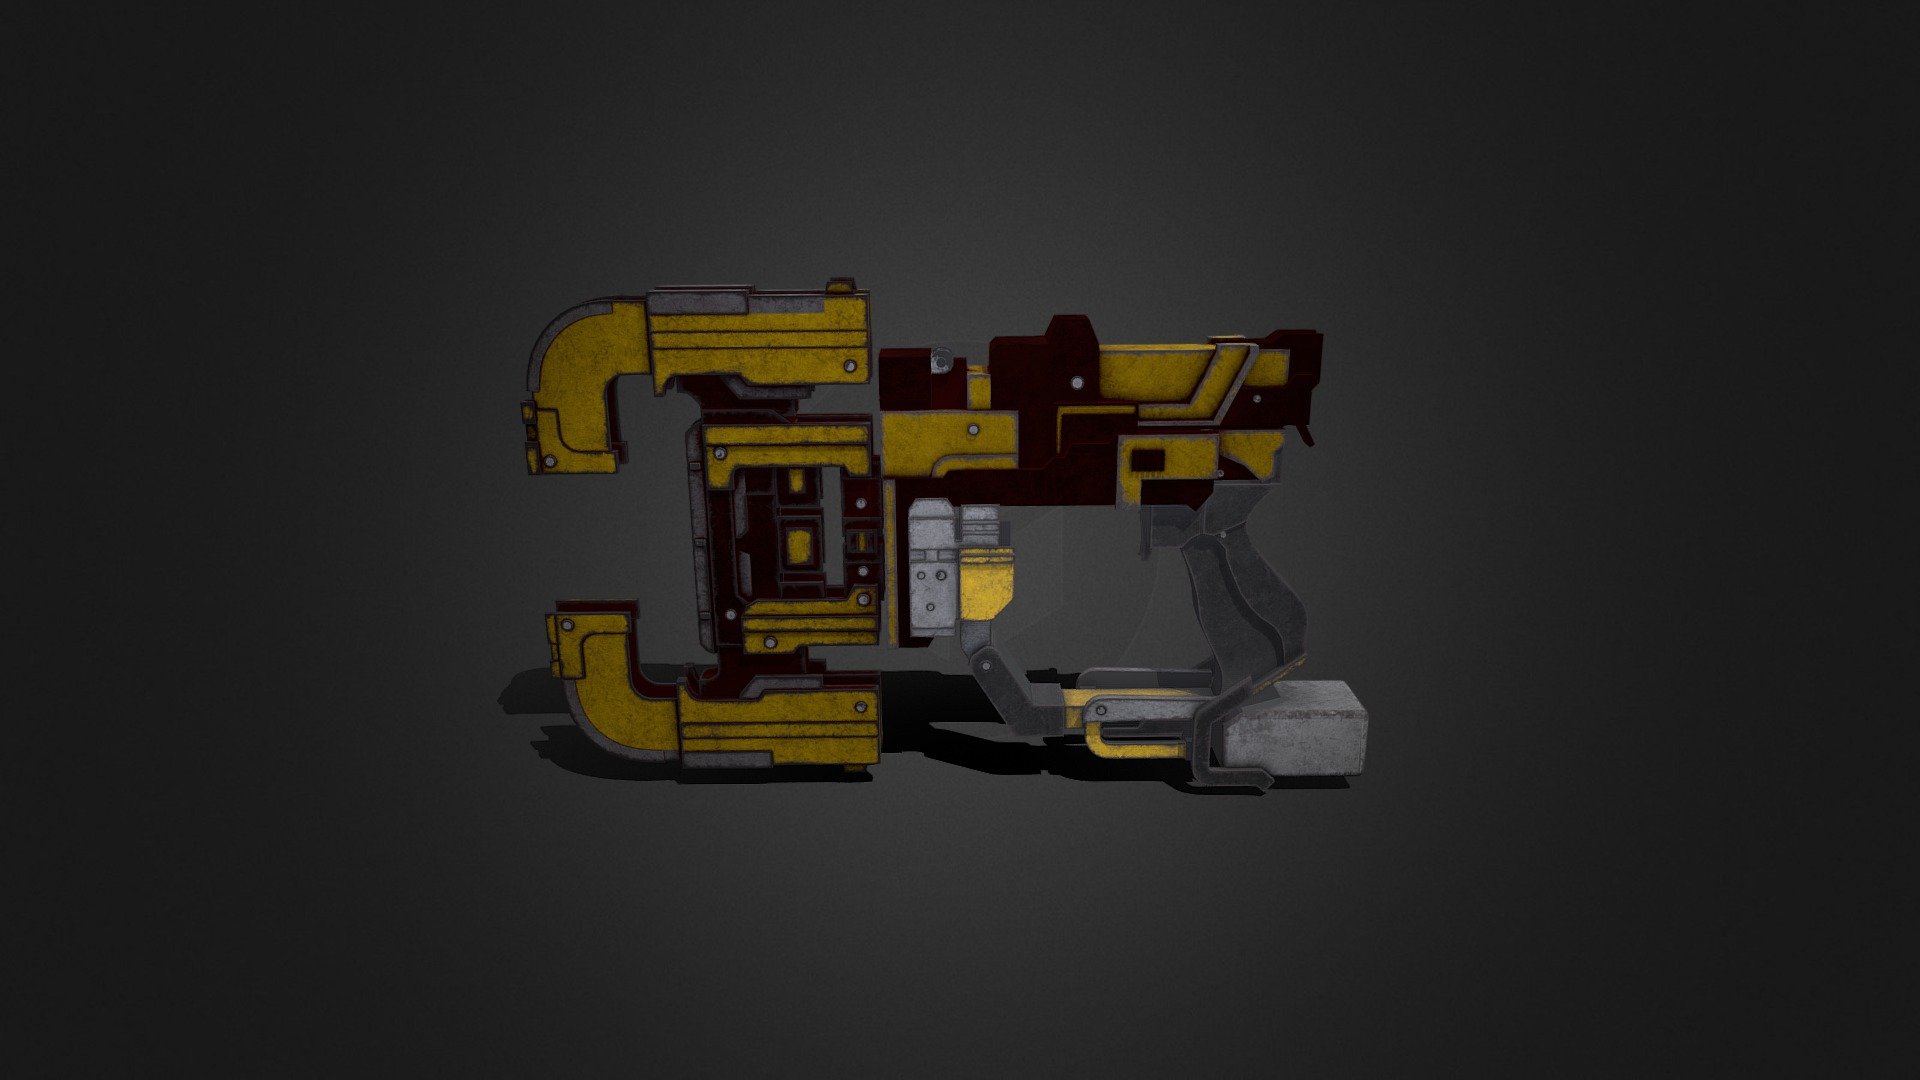 The legendary plasma cutter from the Dead Space game series - plazma cutter - 3D model by frizza01 3d model